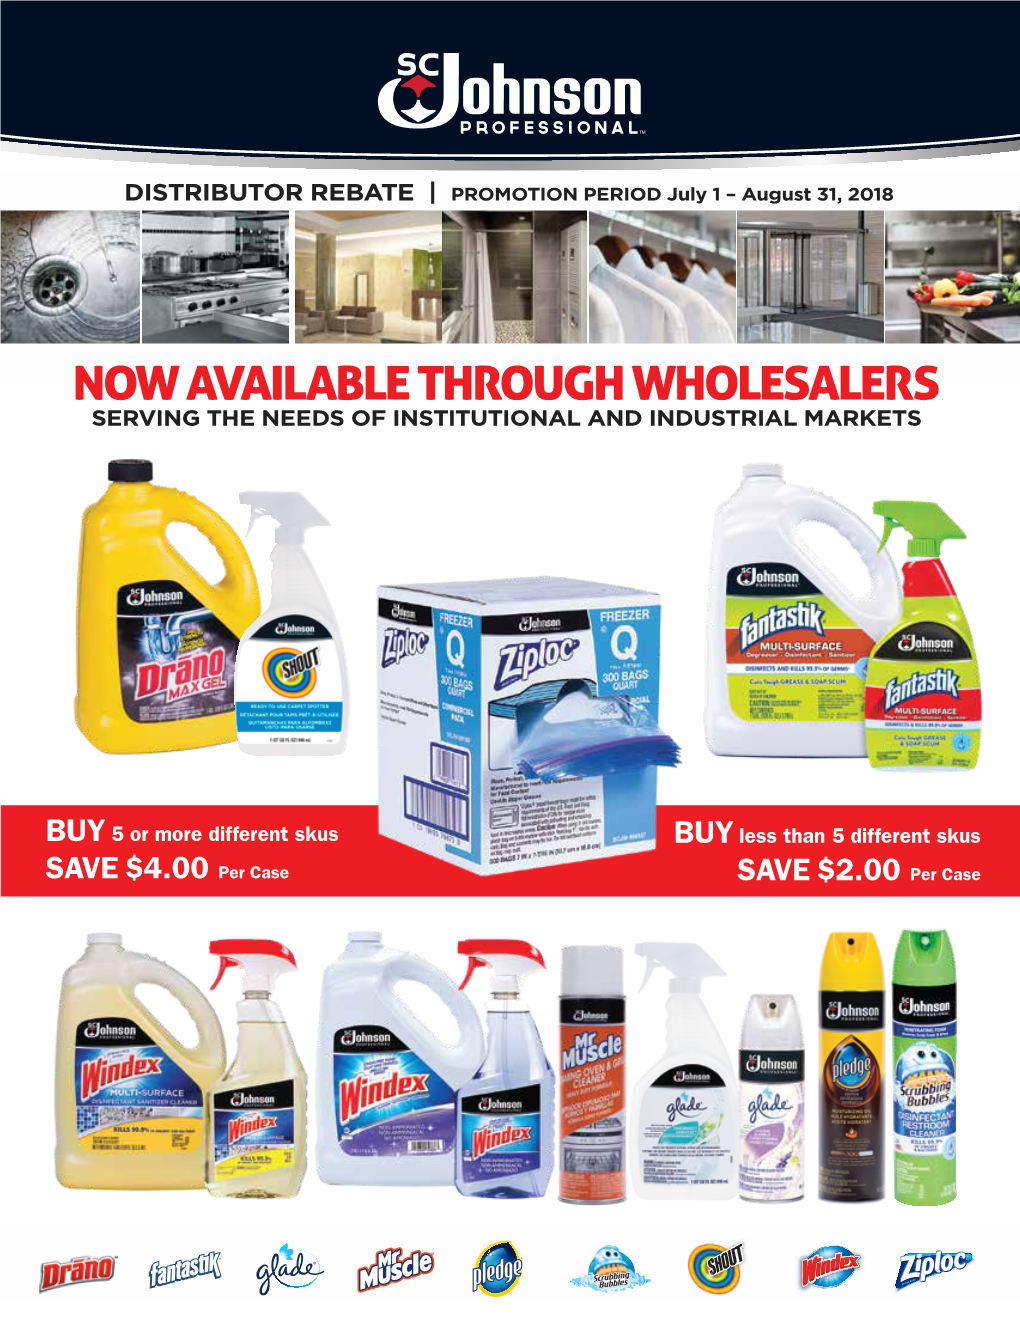 Now Available Through Wholesalers Serving the Needs of Institutional and Industrial Markets